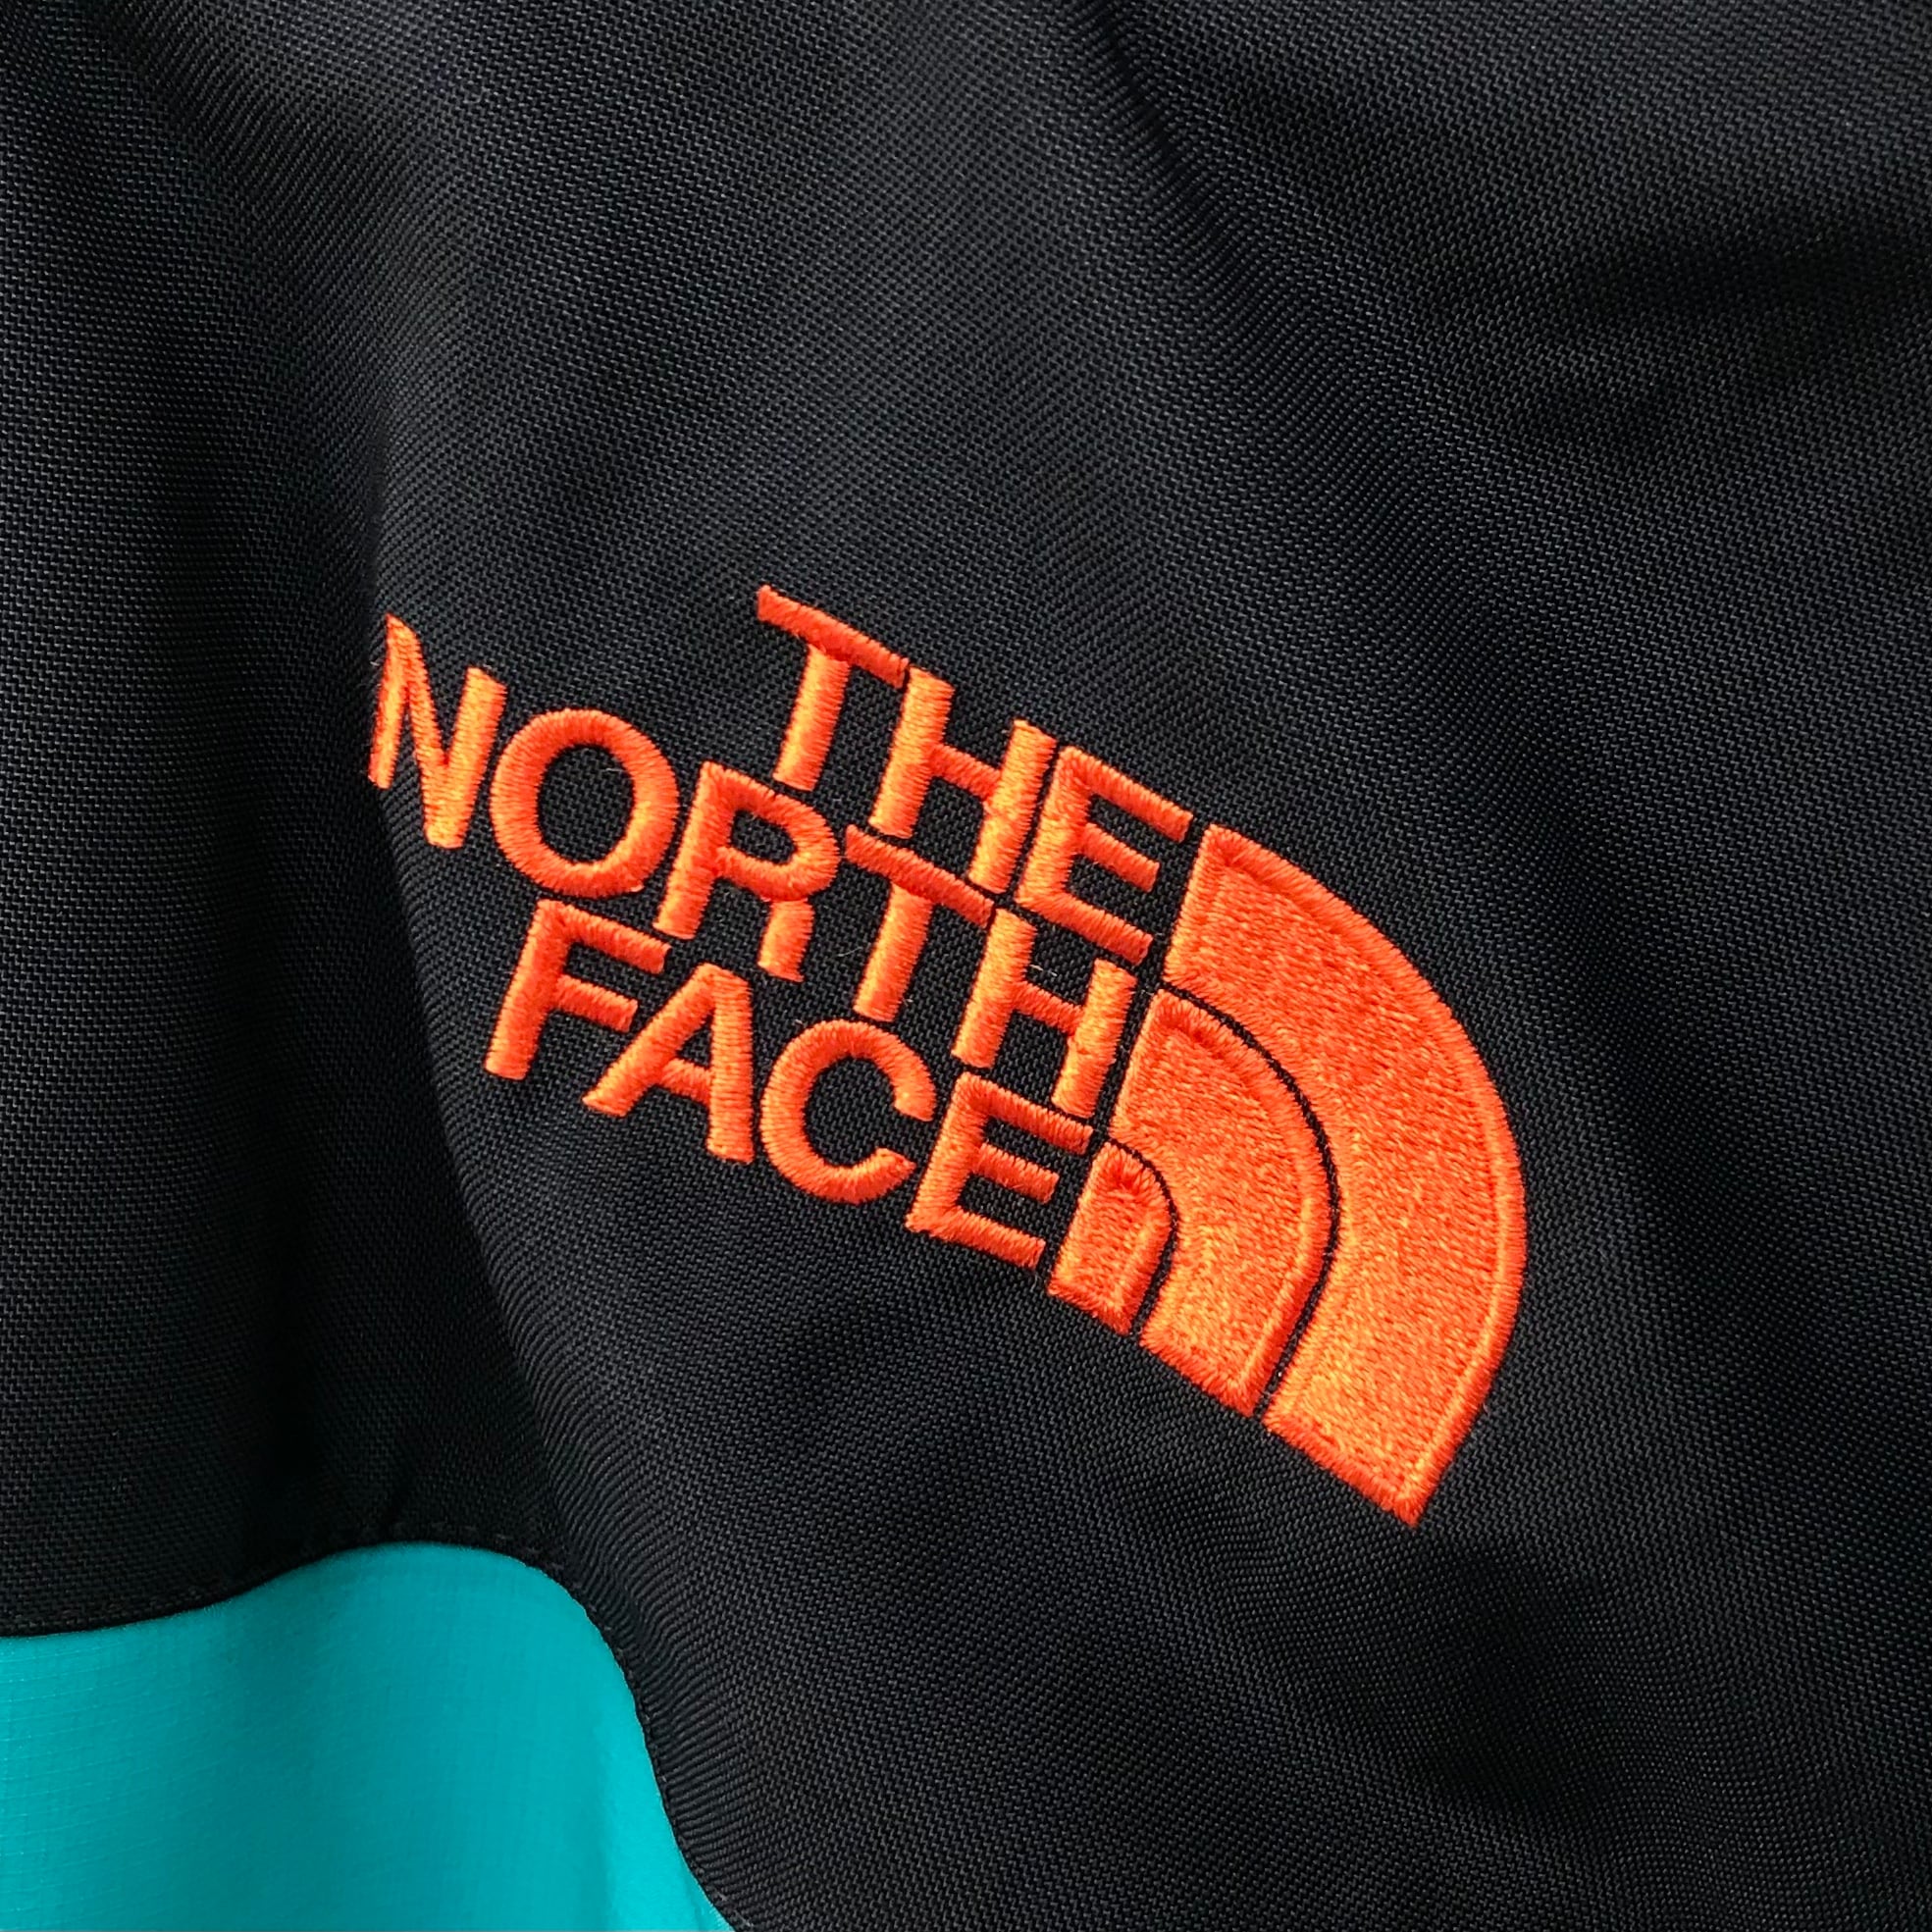 THE NORTH FACE × BEAMS EXPEDITION LIGHT JACKET/ノースフェイス ...